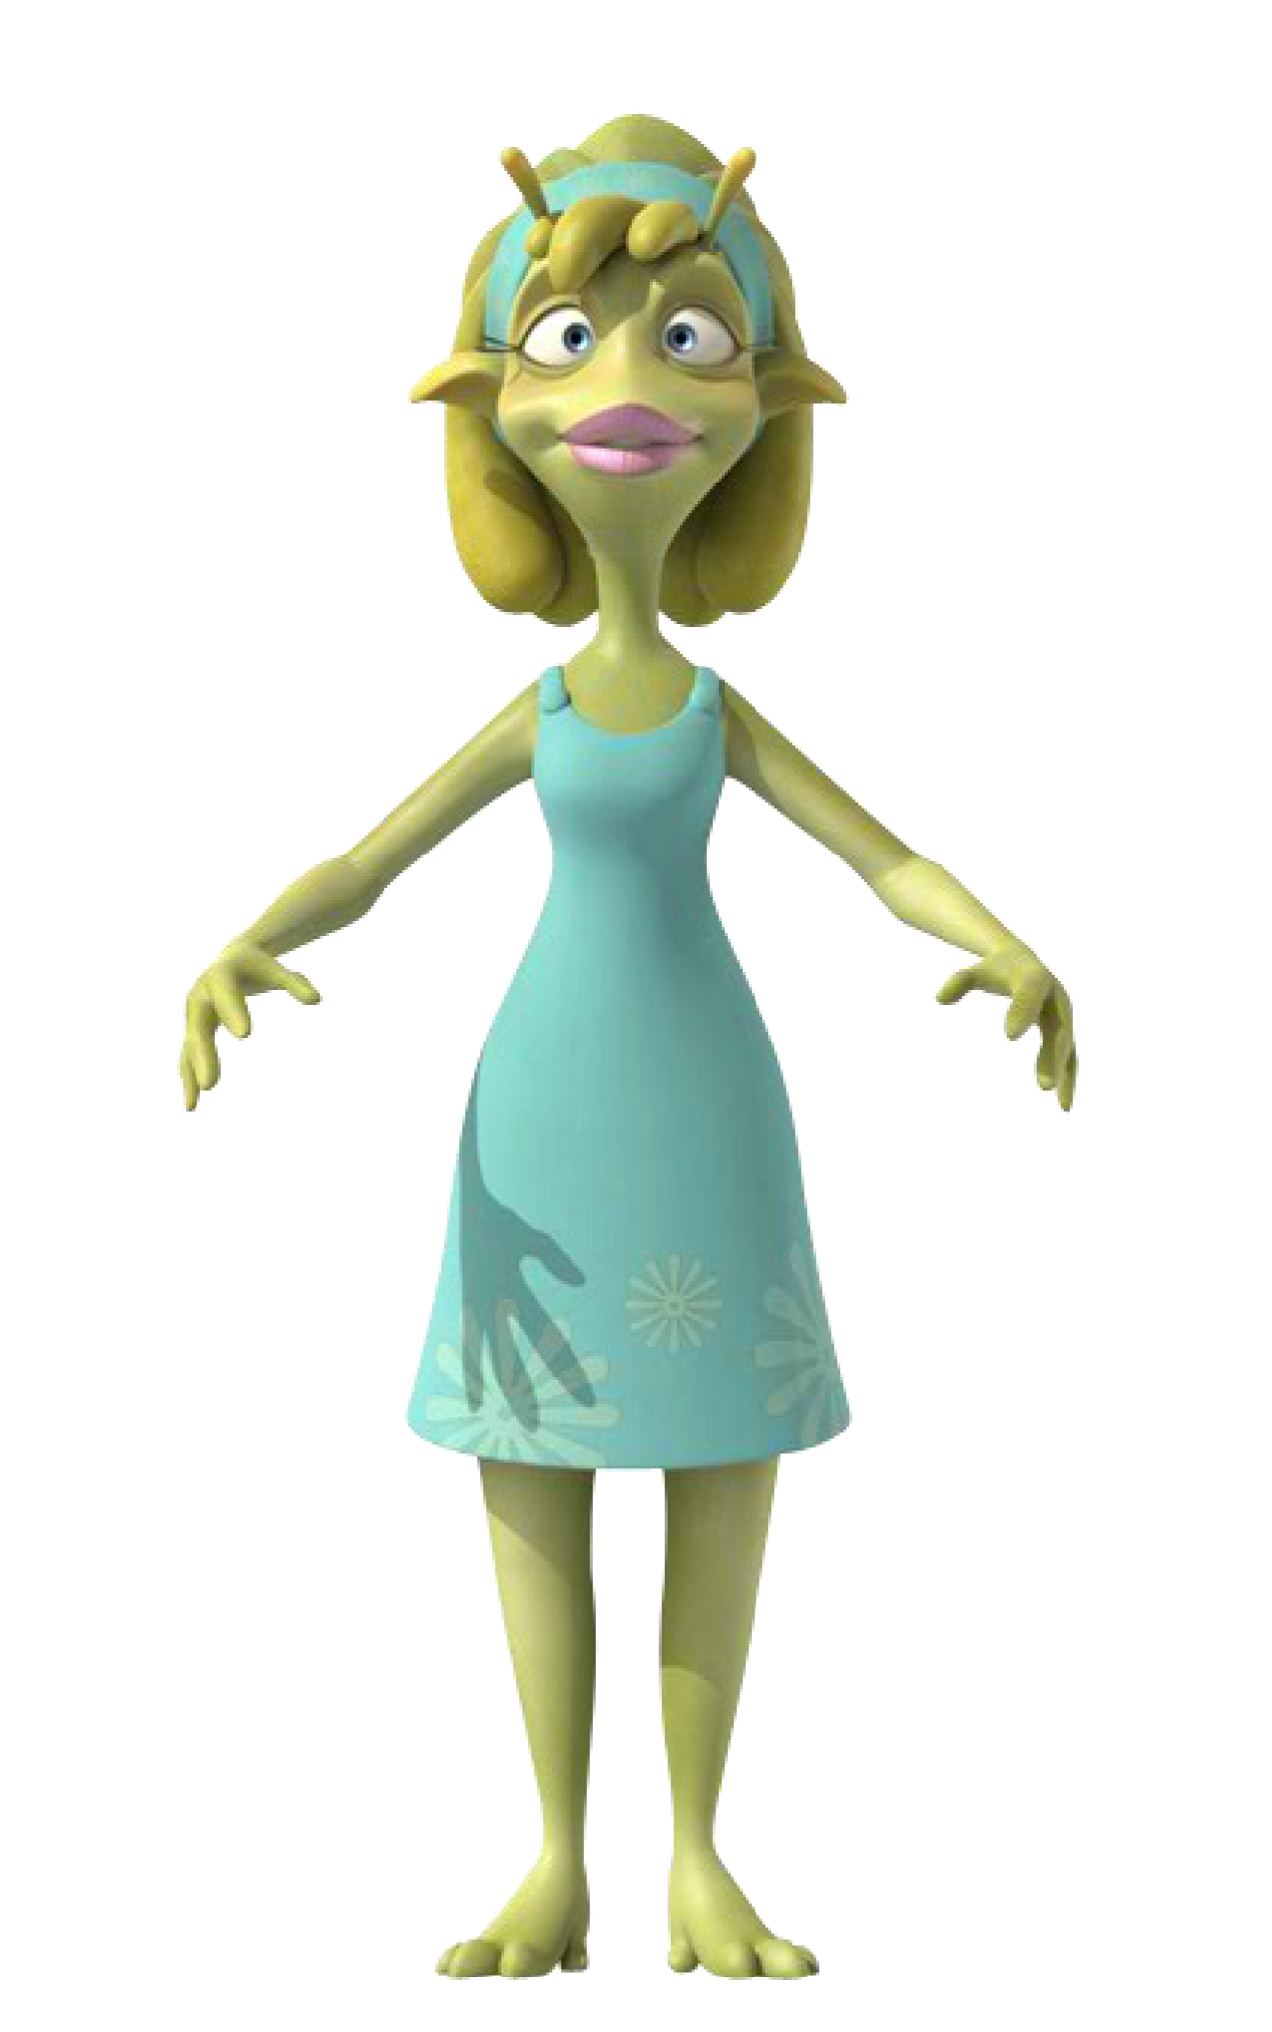 Image - Planet 51 Home 7 1.png | Planet 51 Wiki | FANDOM powered by Wikia